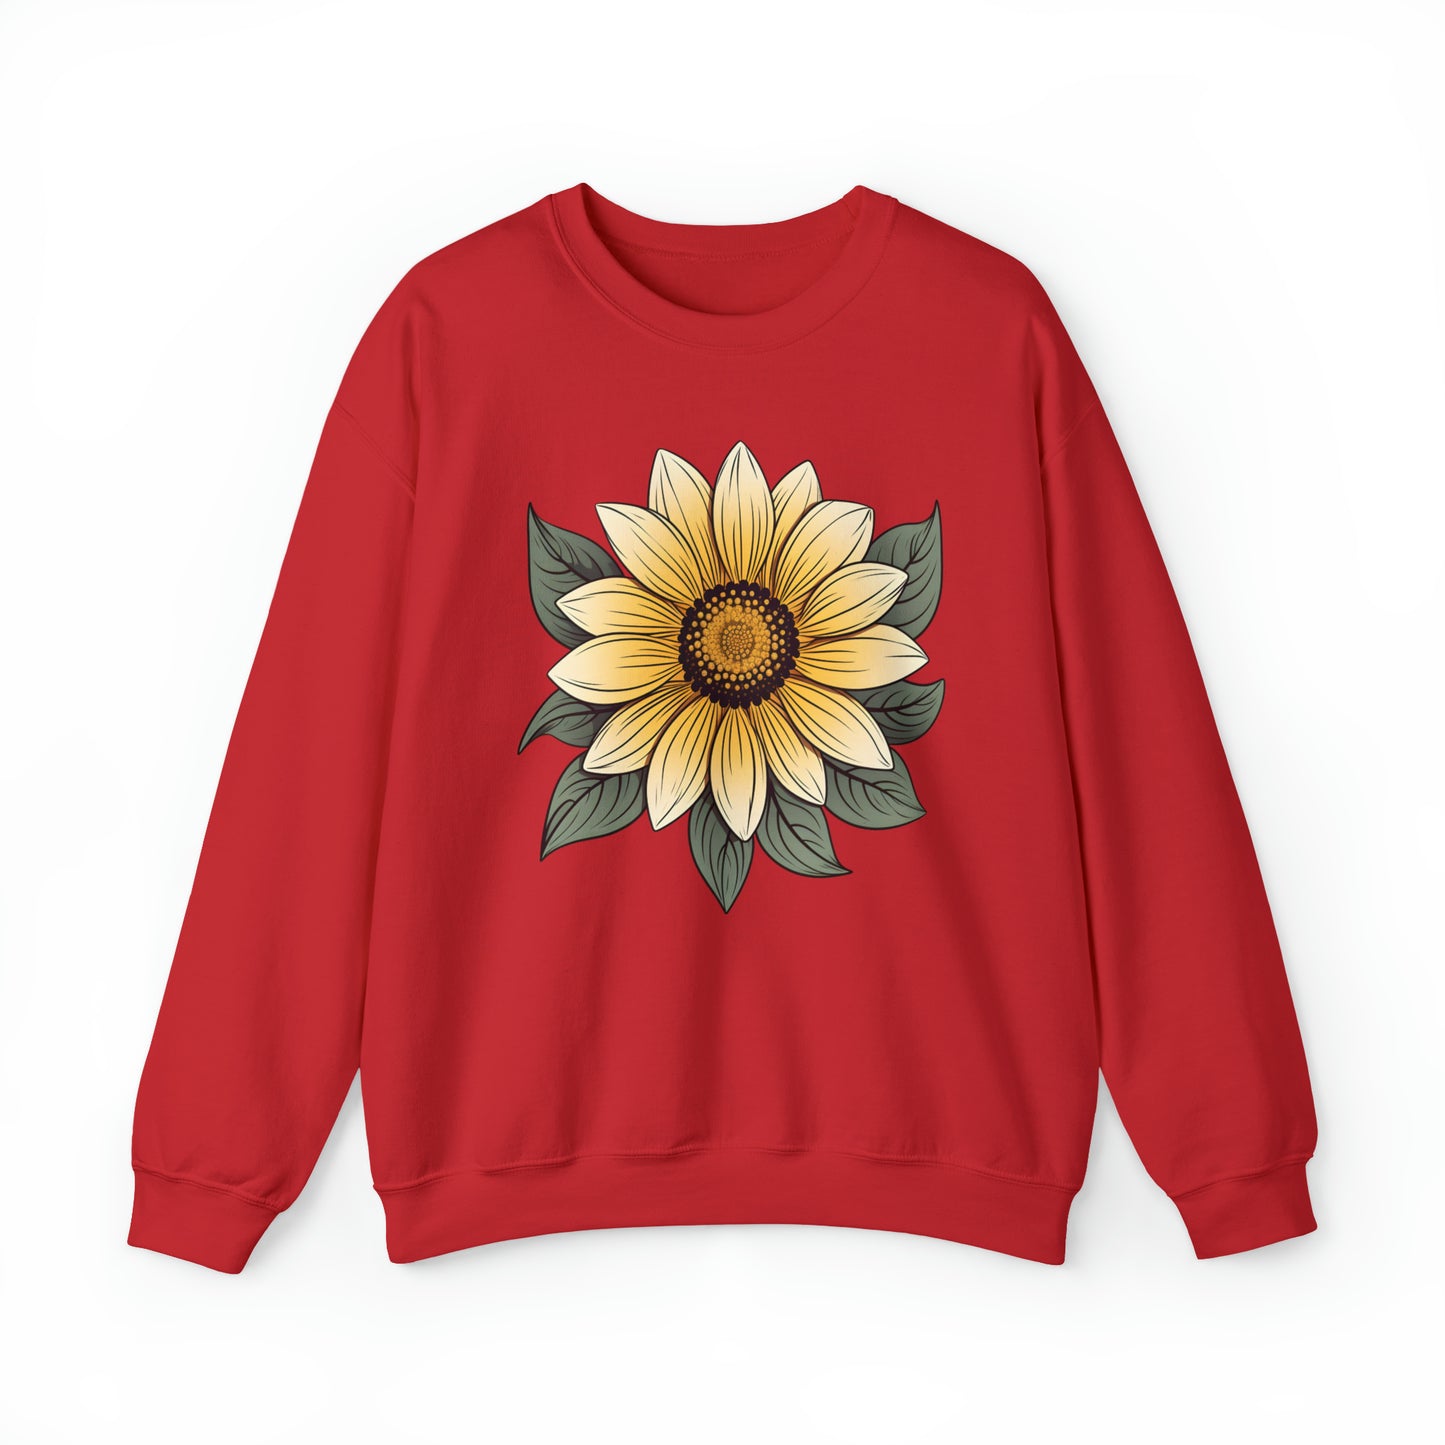 Flower Sweatshirt, Floral Sweatshirt Flower Sweatshirt Flower Sweater, Flower Shirt, Floral Print, Flower TShirt, Perfect Mothers Day Gift